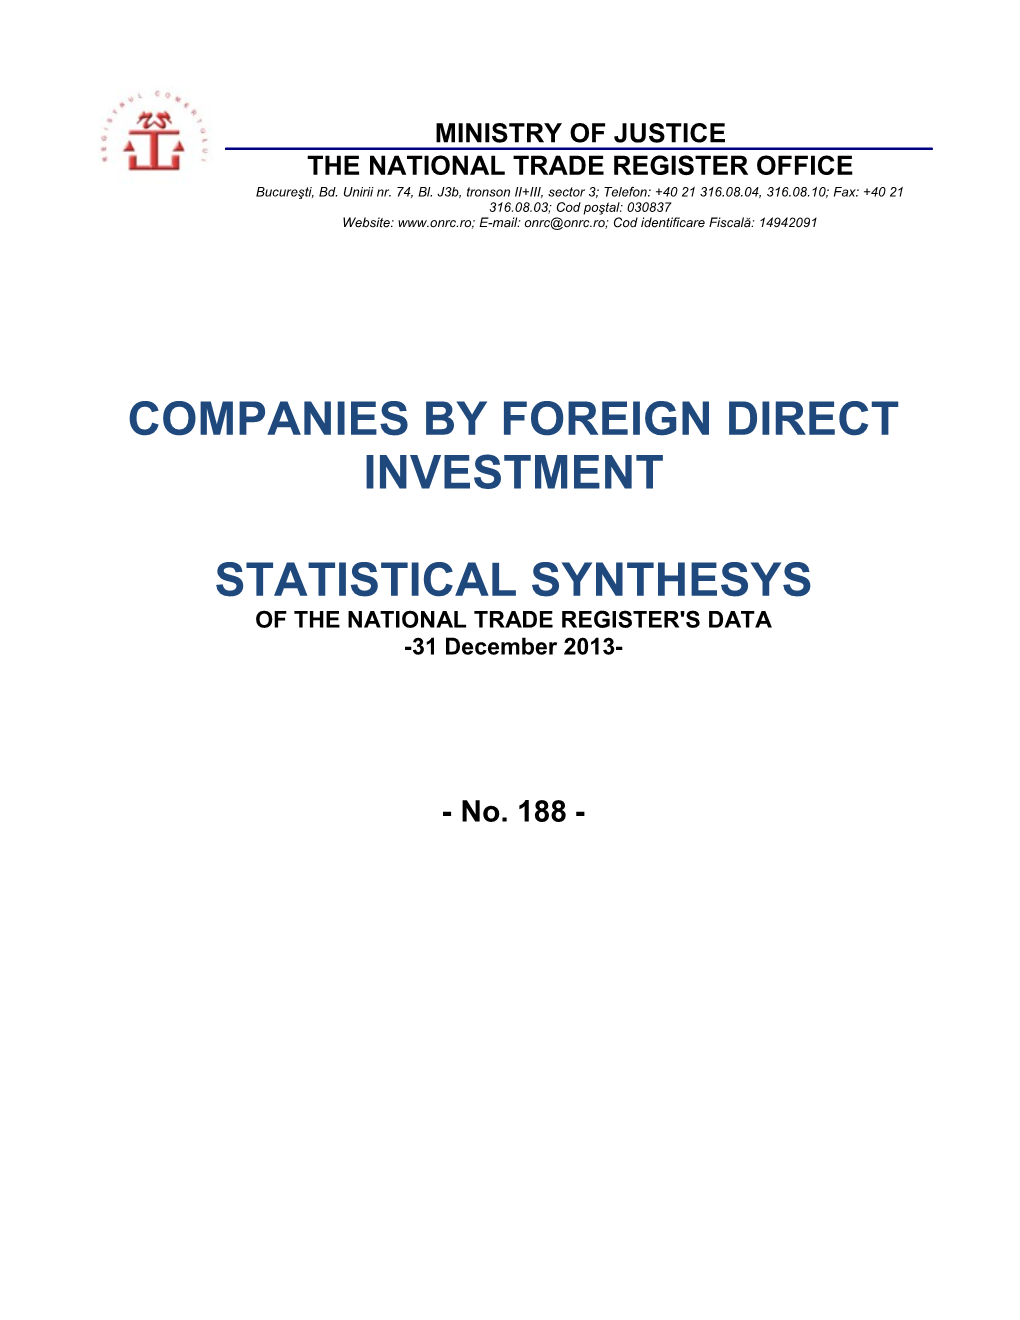 Companies by Foreign Direct